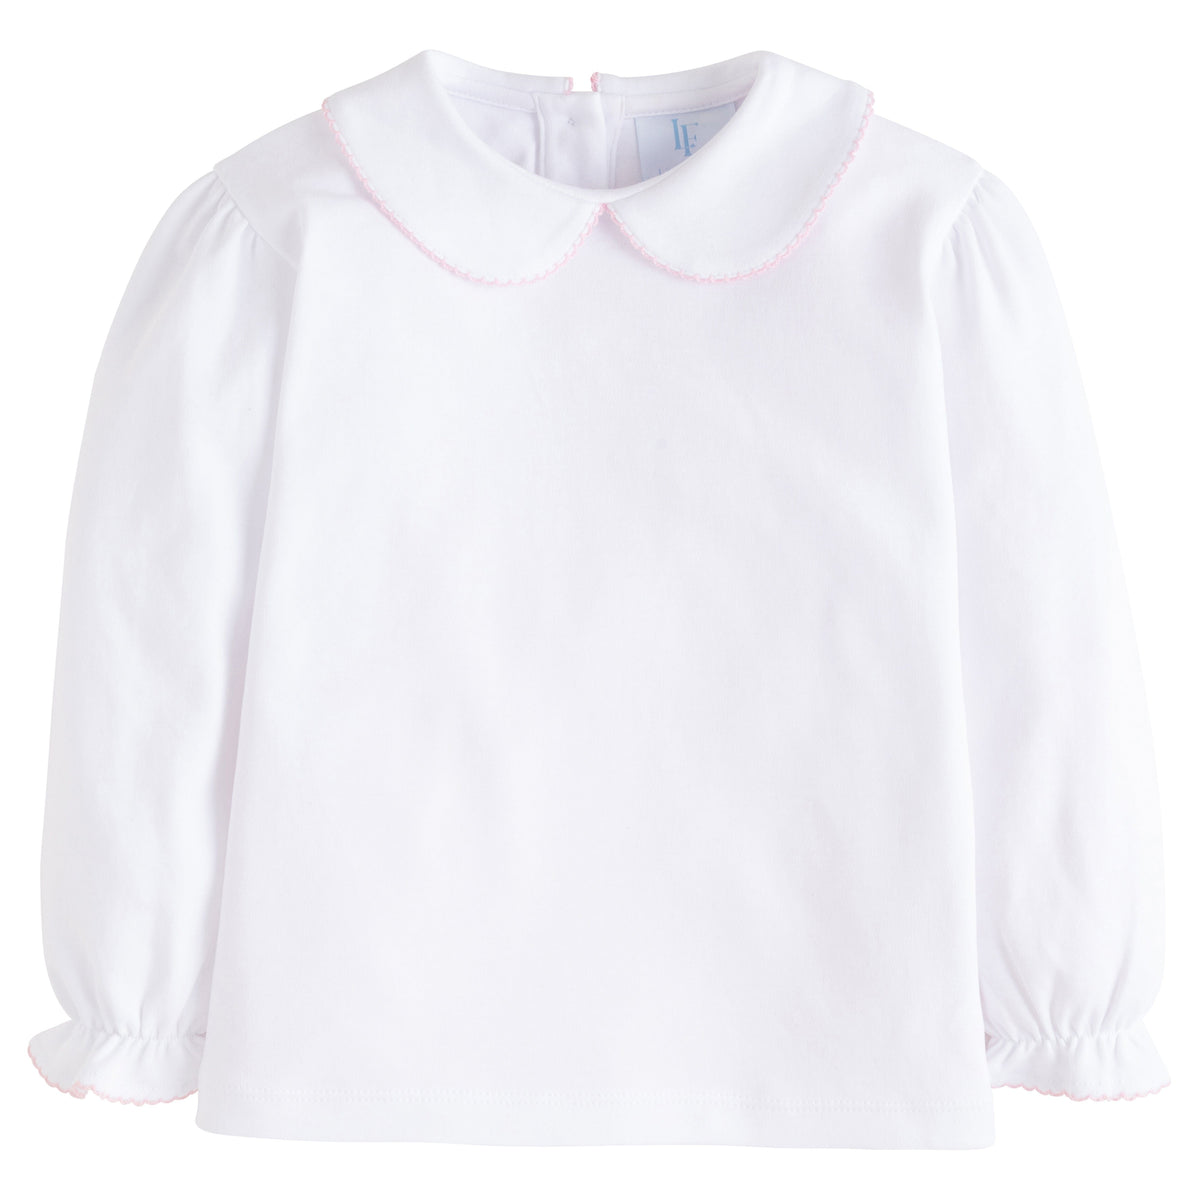 seguridadindustrialcr classic childrens clothing girls whit blouse with peter pan collar and pink picot trim